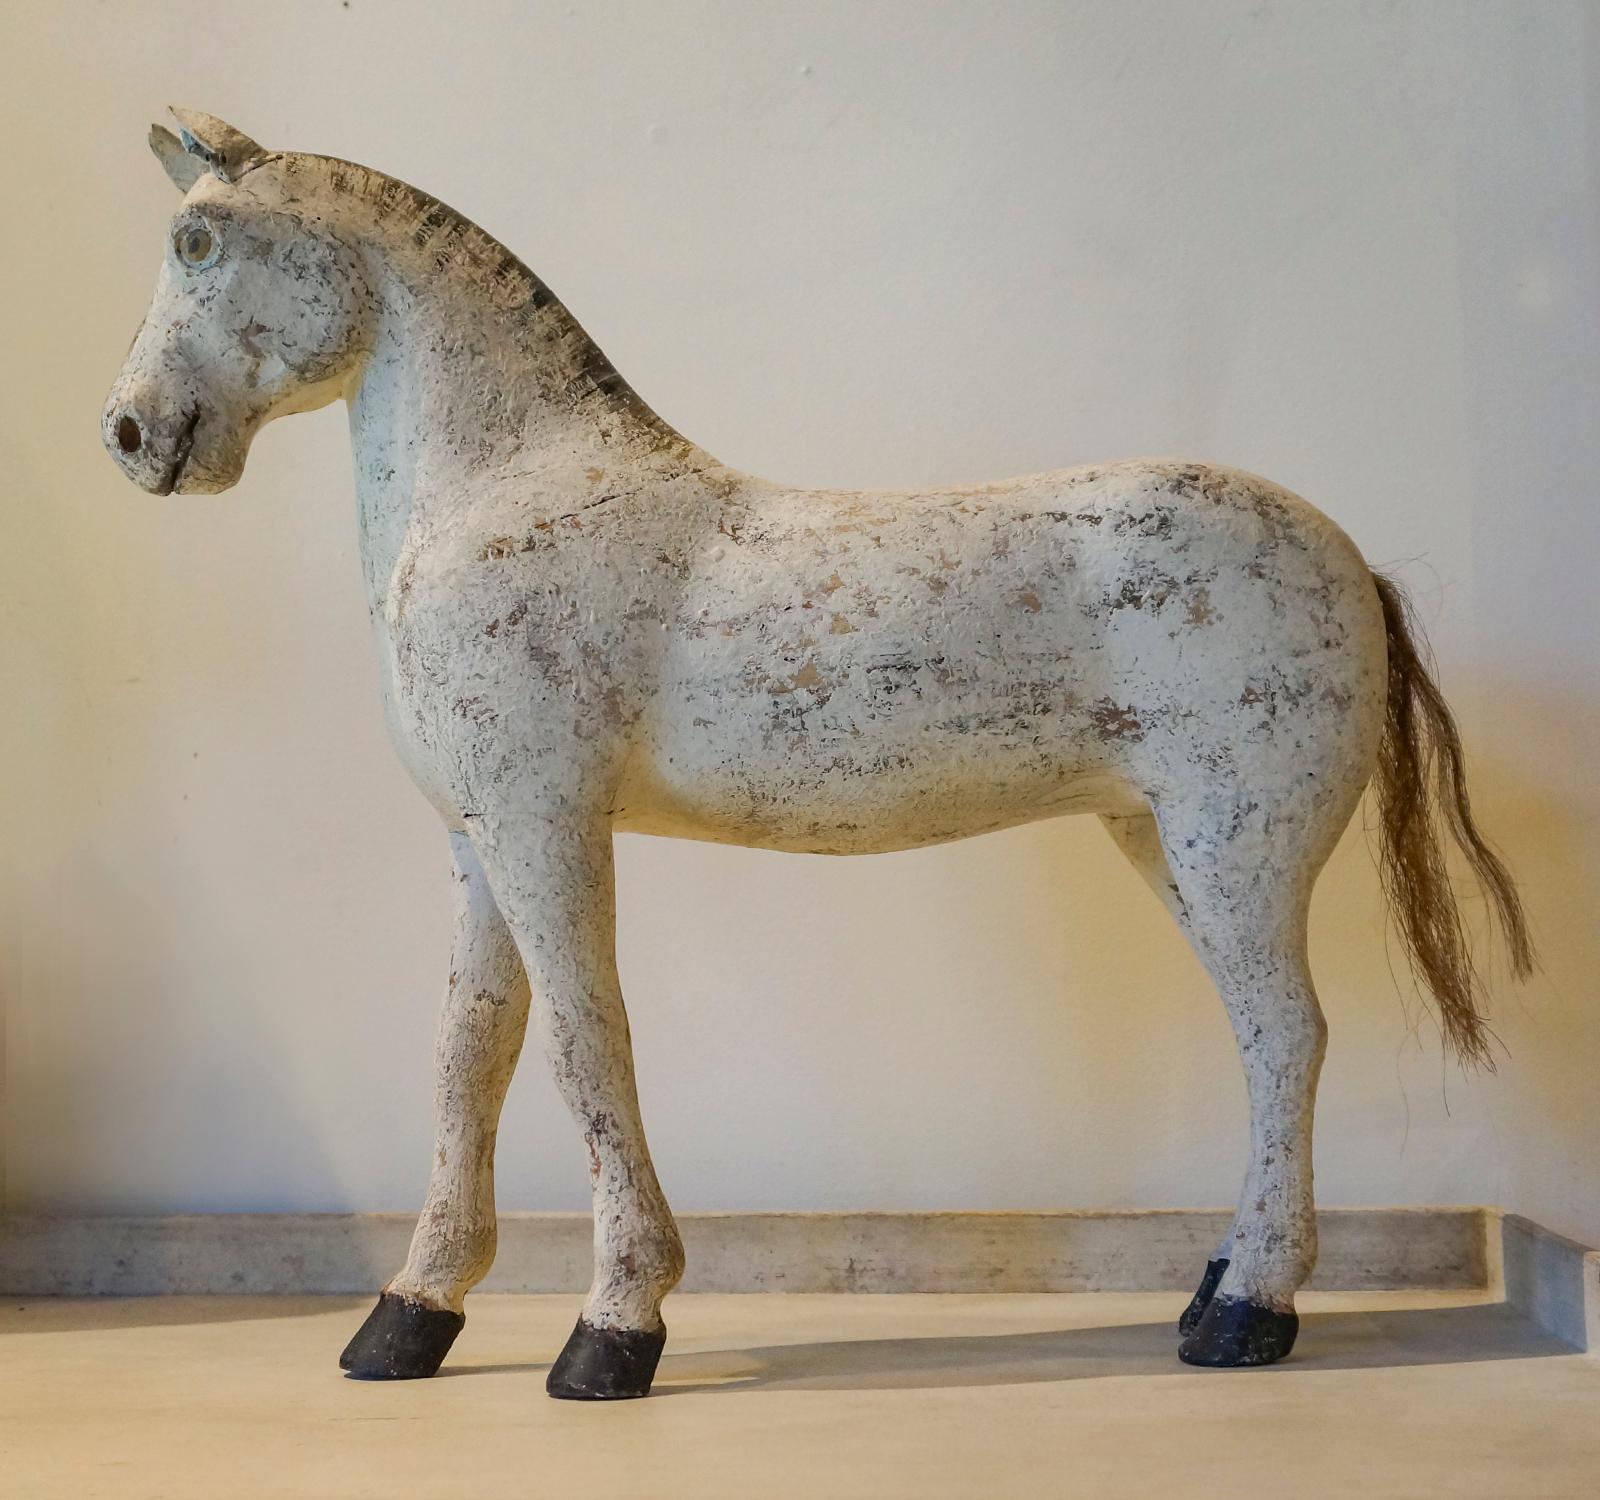 Carved toy horse, Sweden, circa 1880, with leather ears and horsehair tail. Original painted surface, including the mane and eyes. Alert expression suggests this boy is ready for a romp.